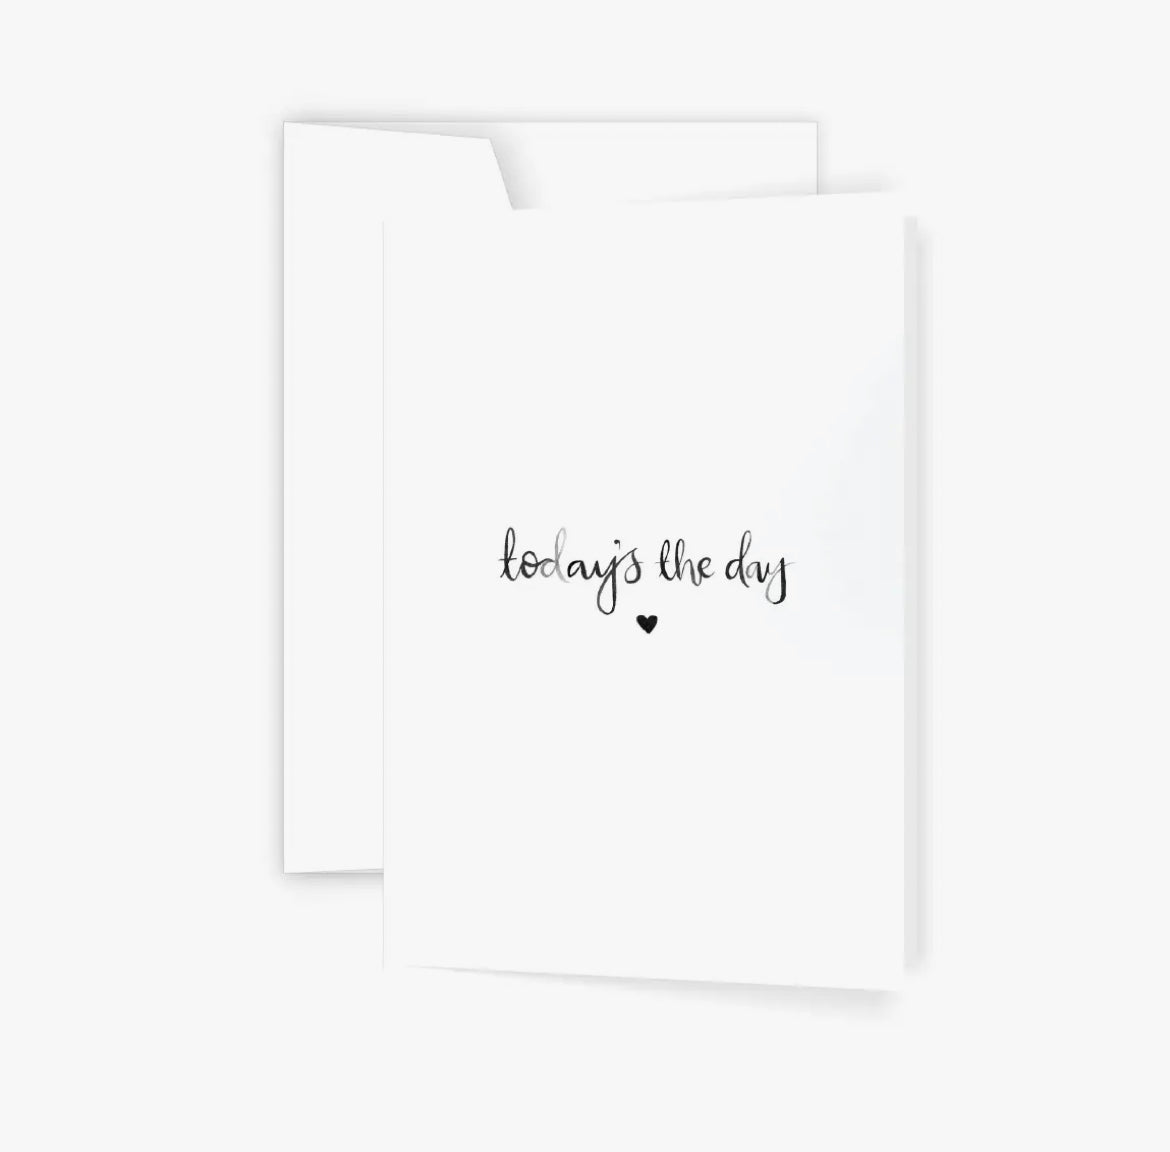 Today’s the day card